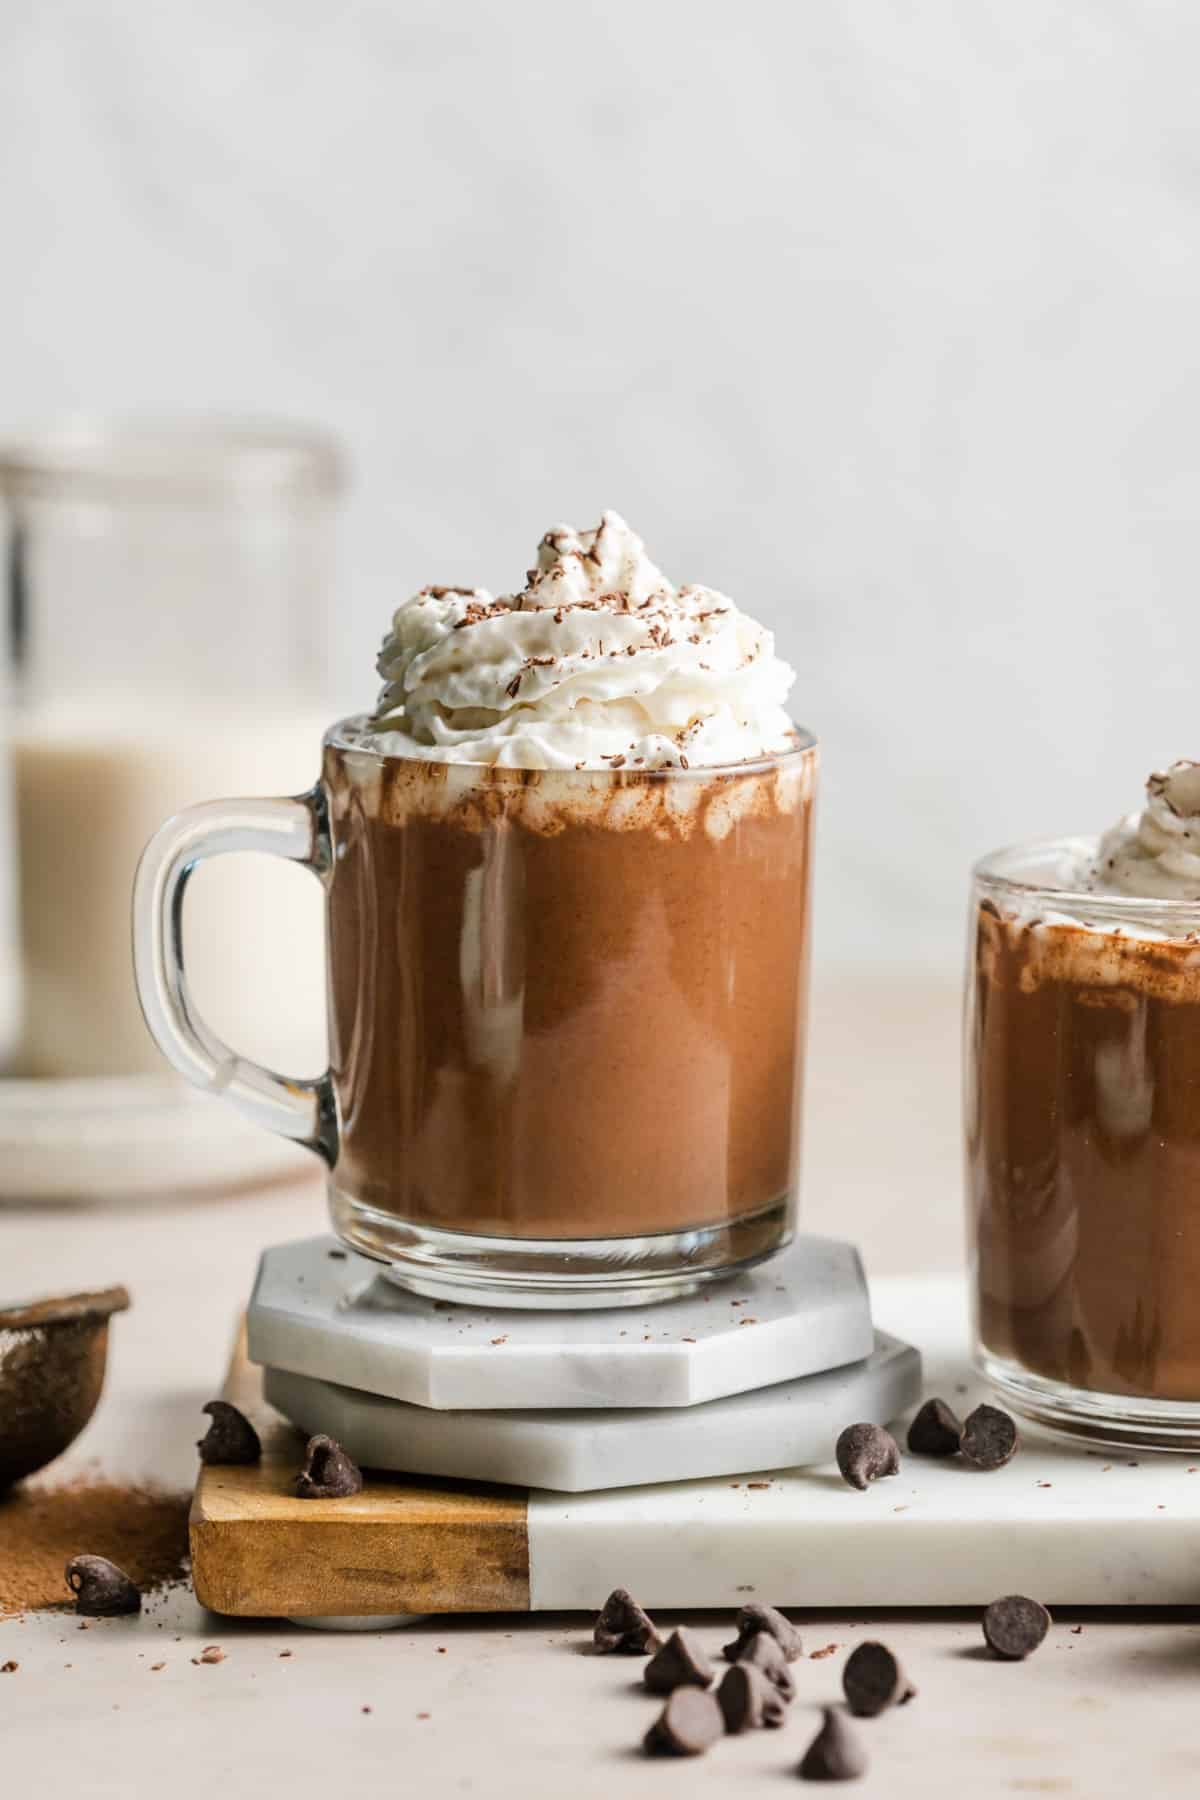 vegan hot chocolate in a glass mug with whipped cream on top.